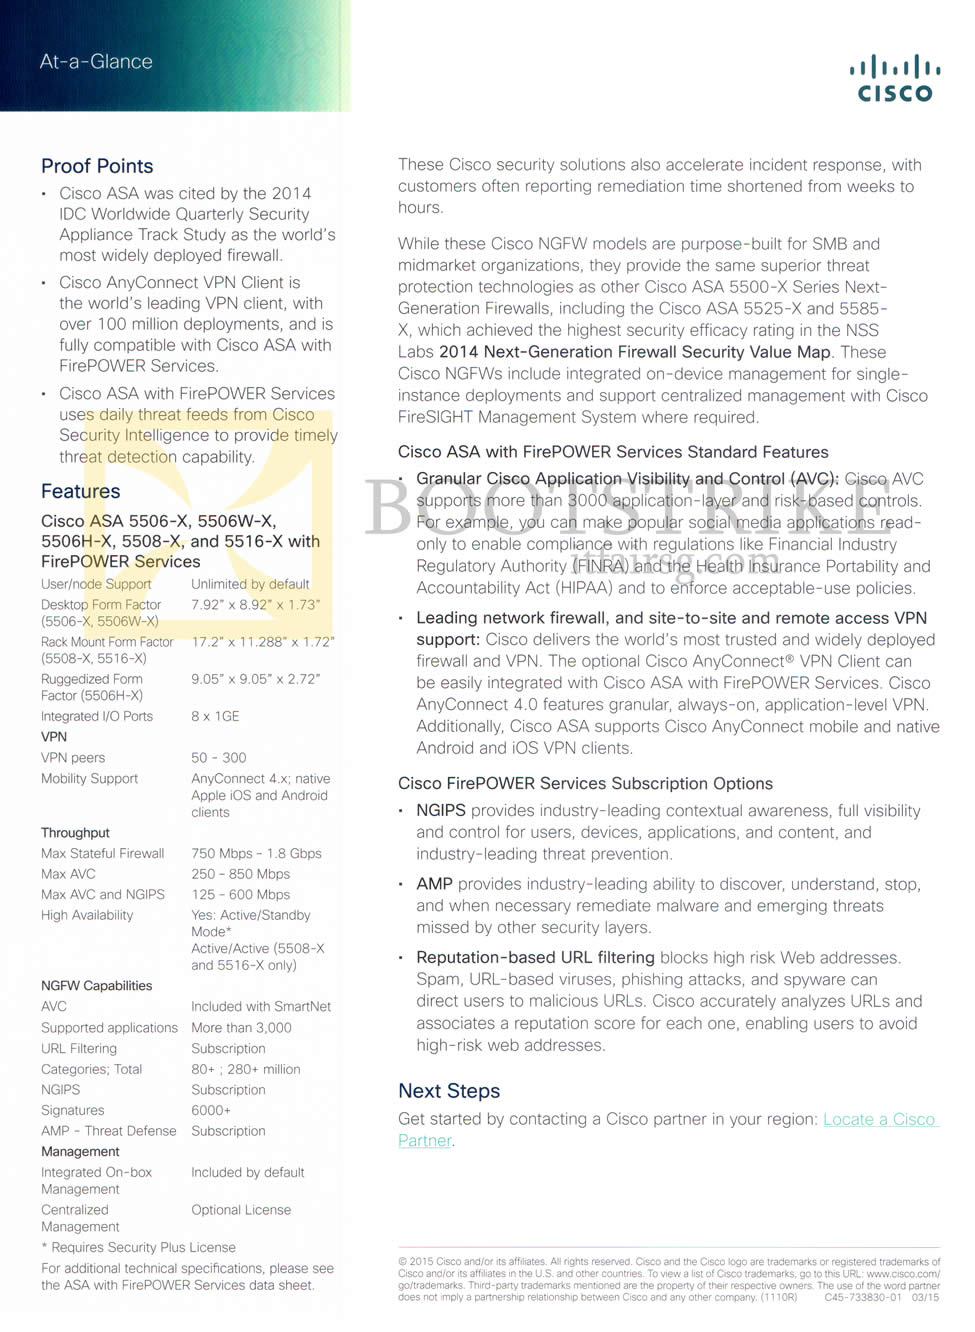 SITEX 2015 price list image brochure of Newstead Cisco Firepower Services Features, Subscription Options